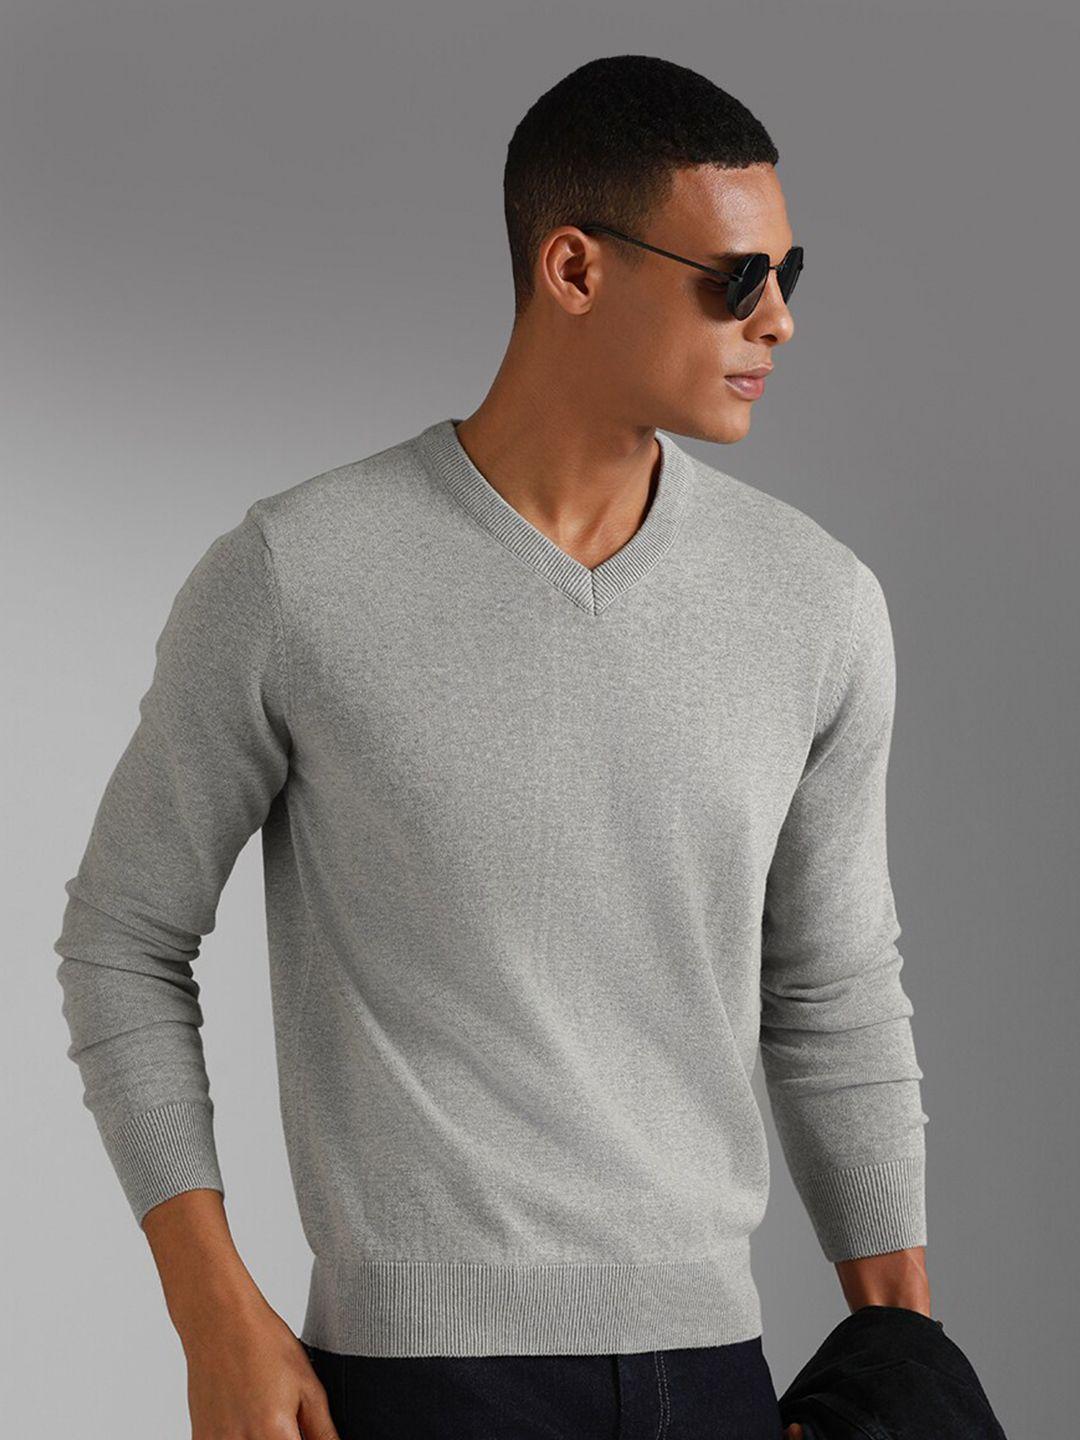 high star v-neck long sleeves cotton pullover sweater